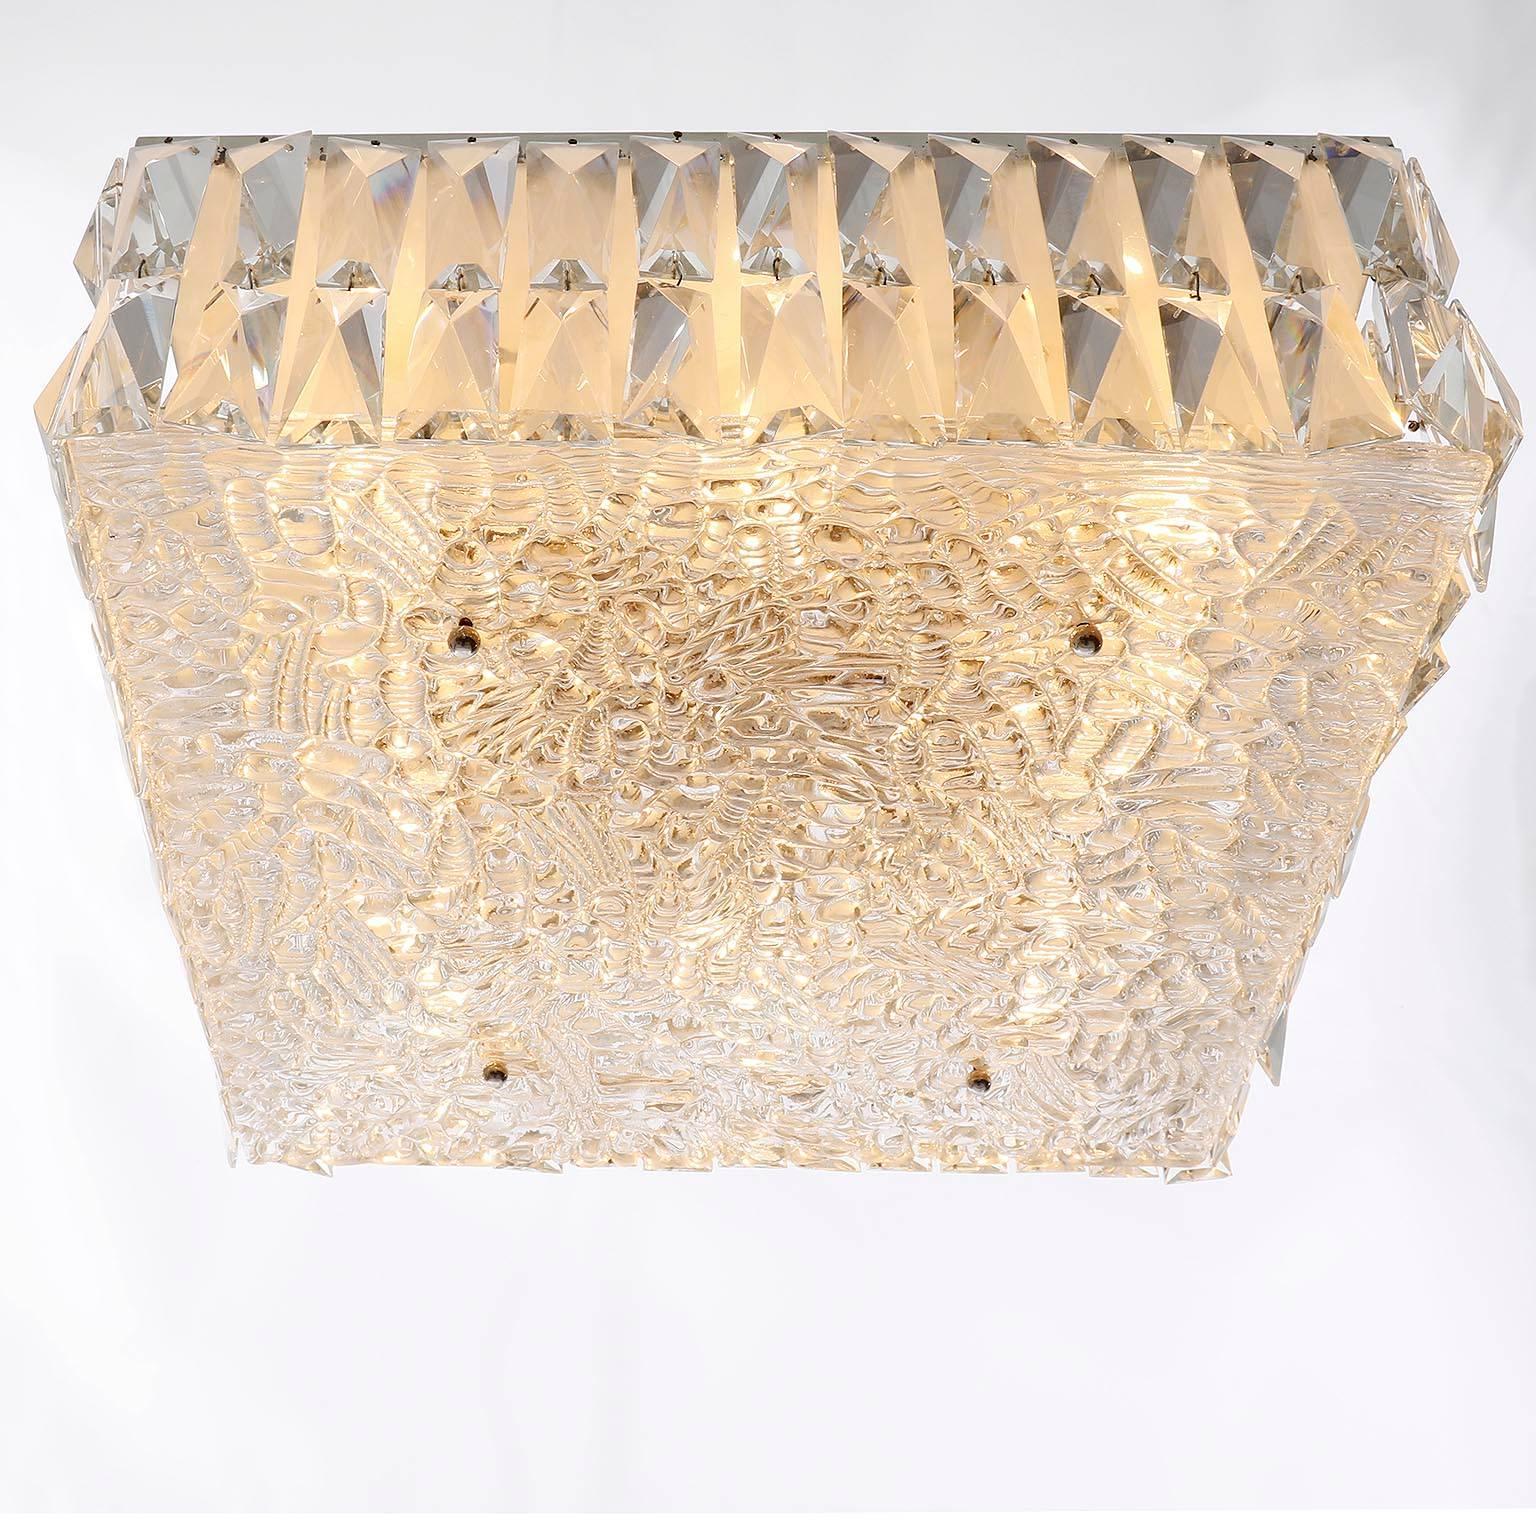 Square Kalmar Light Fixture, Textured and Crystal Glass, 1960s, One of Two (Mitte des 20. Jahrhunderts)